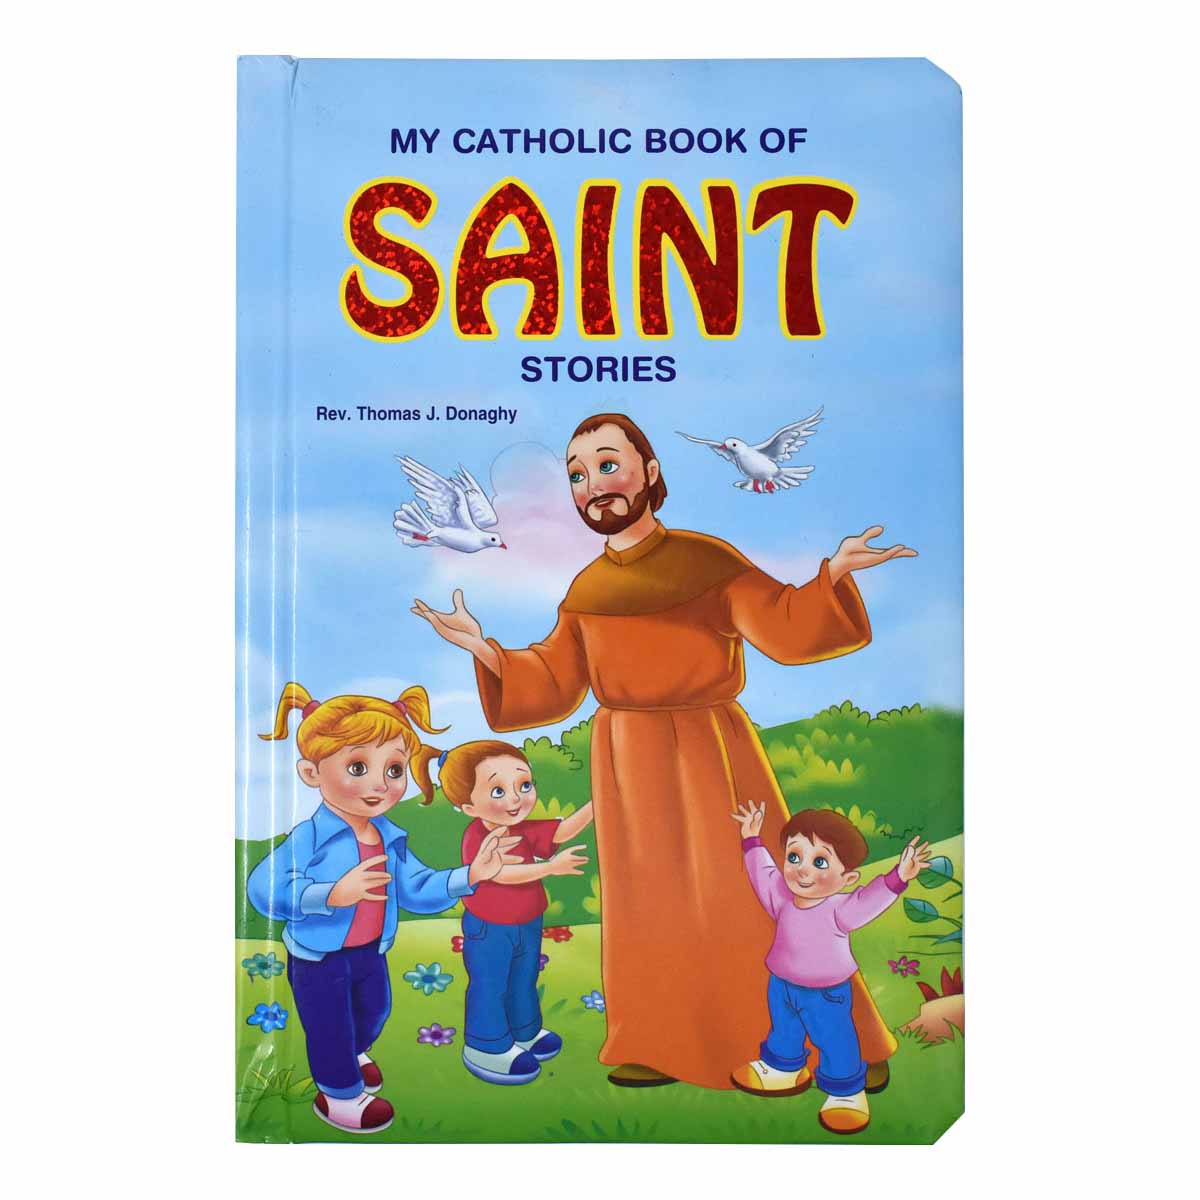 My Catholic Book Of Saint Stories by Rev  Thomas Donaghy-755/97, Children's Book